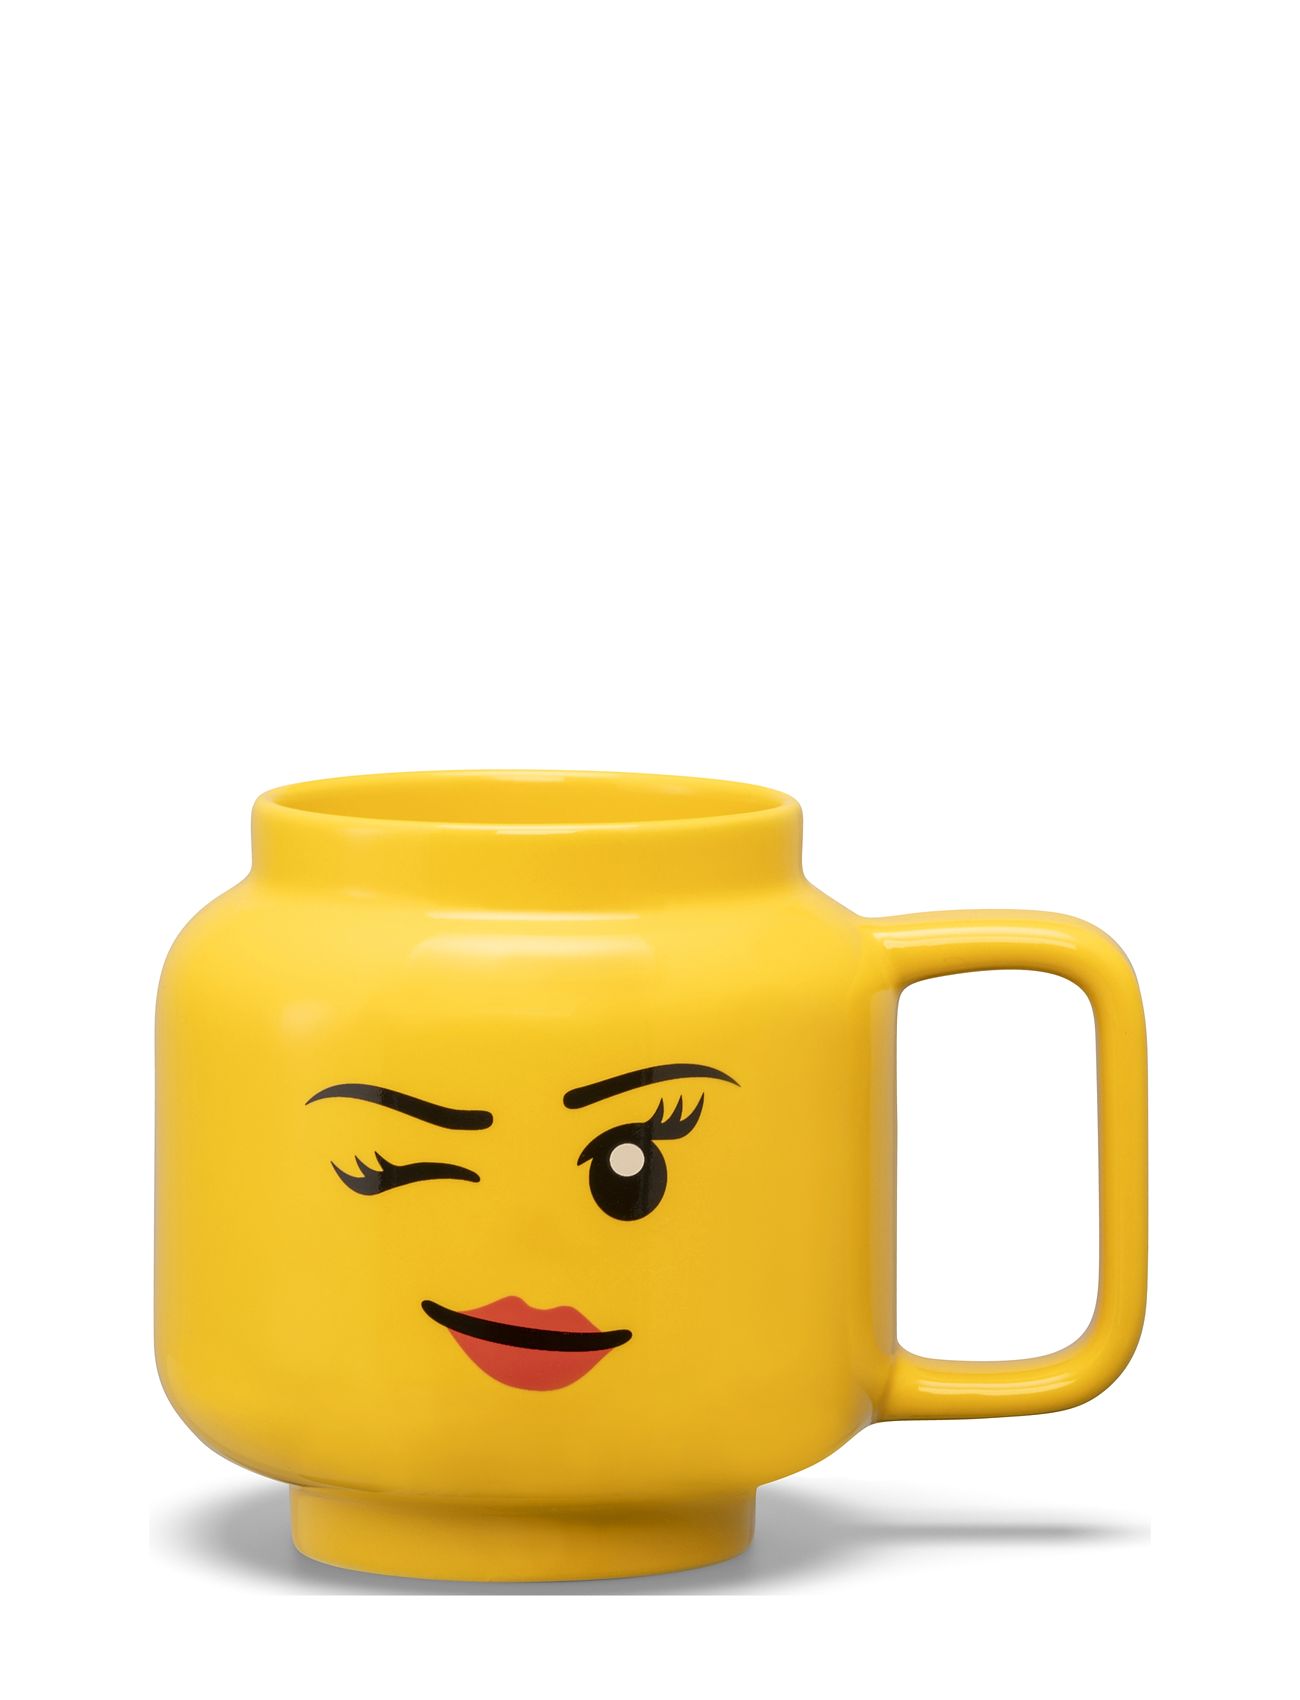 Lego Ceramic Mug Large Winking Girl Home Meal Time Cups & Mugs Cups Yellow LEGO STORAGE